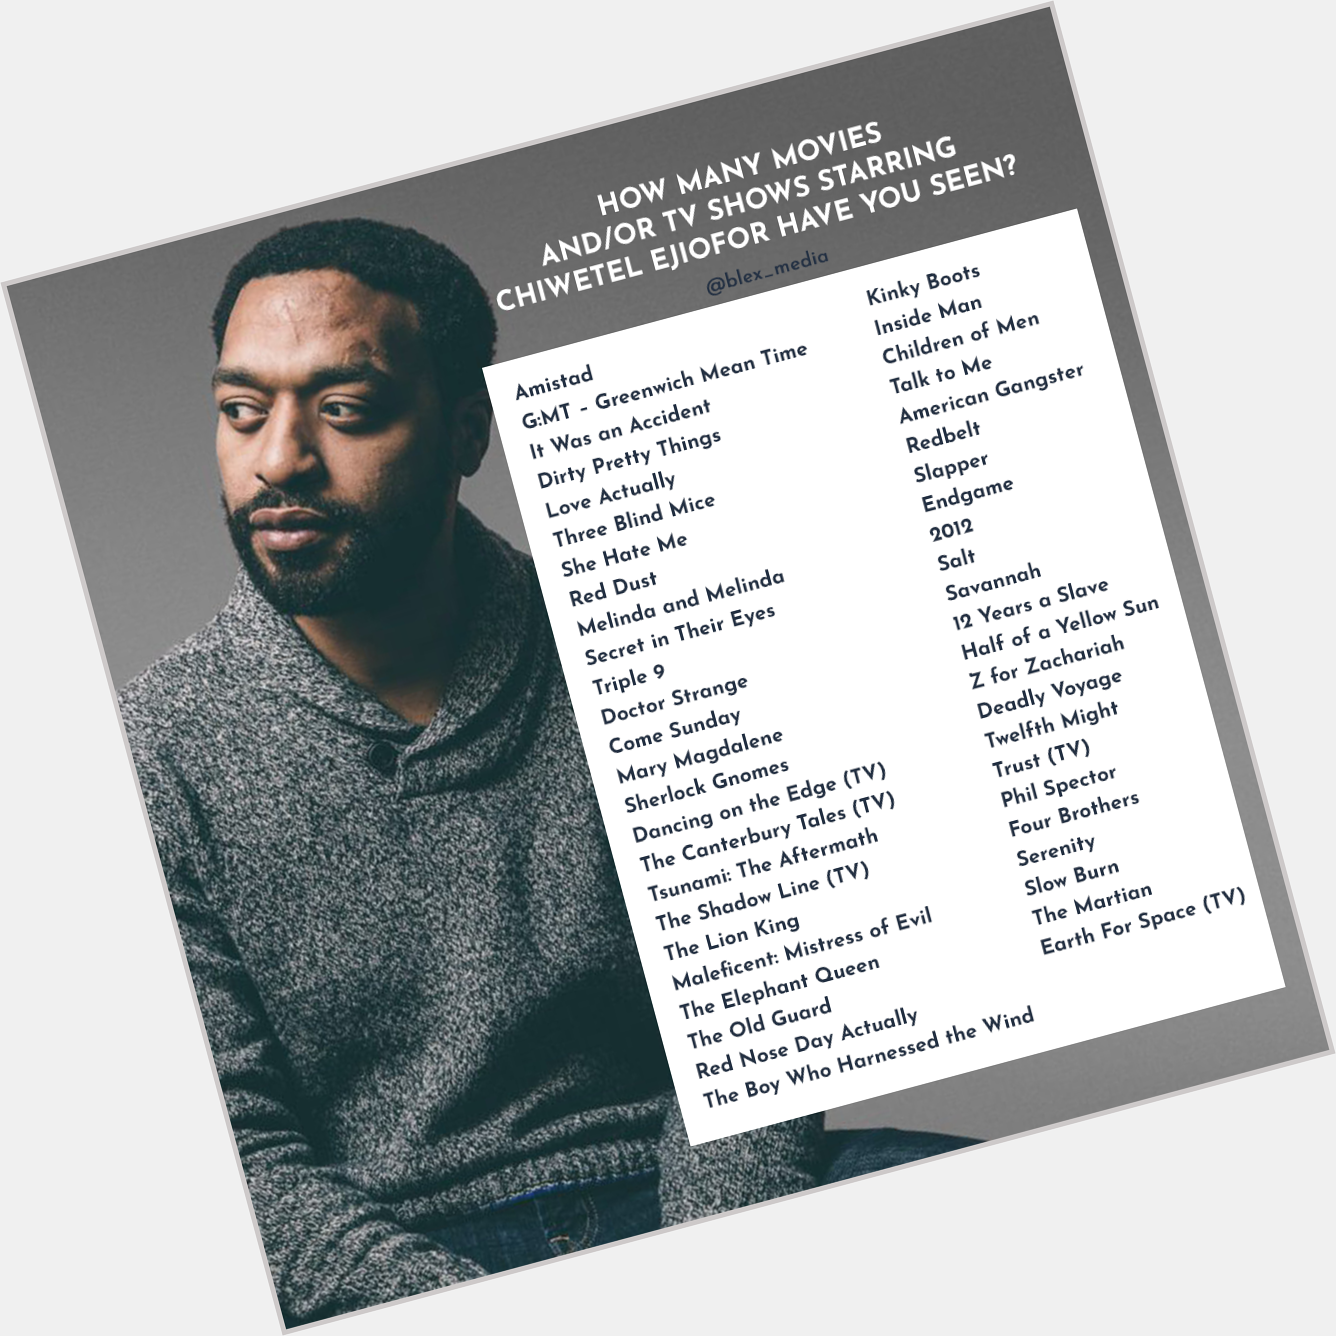 Happy Birthday, Chiwetel Ejiofor! How many of his TV shows and movies have you seen? 